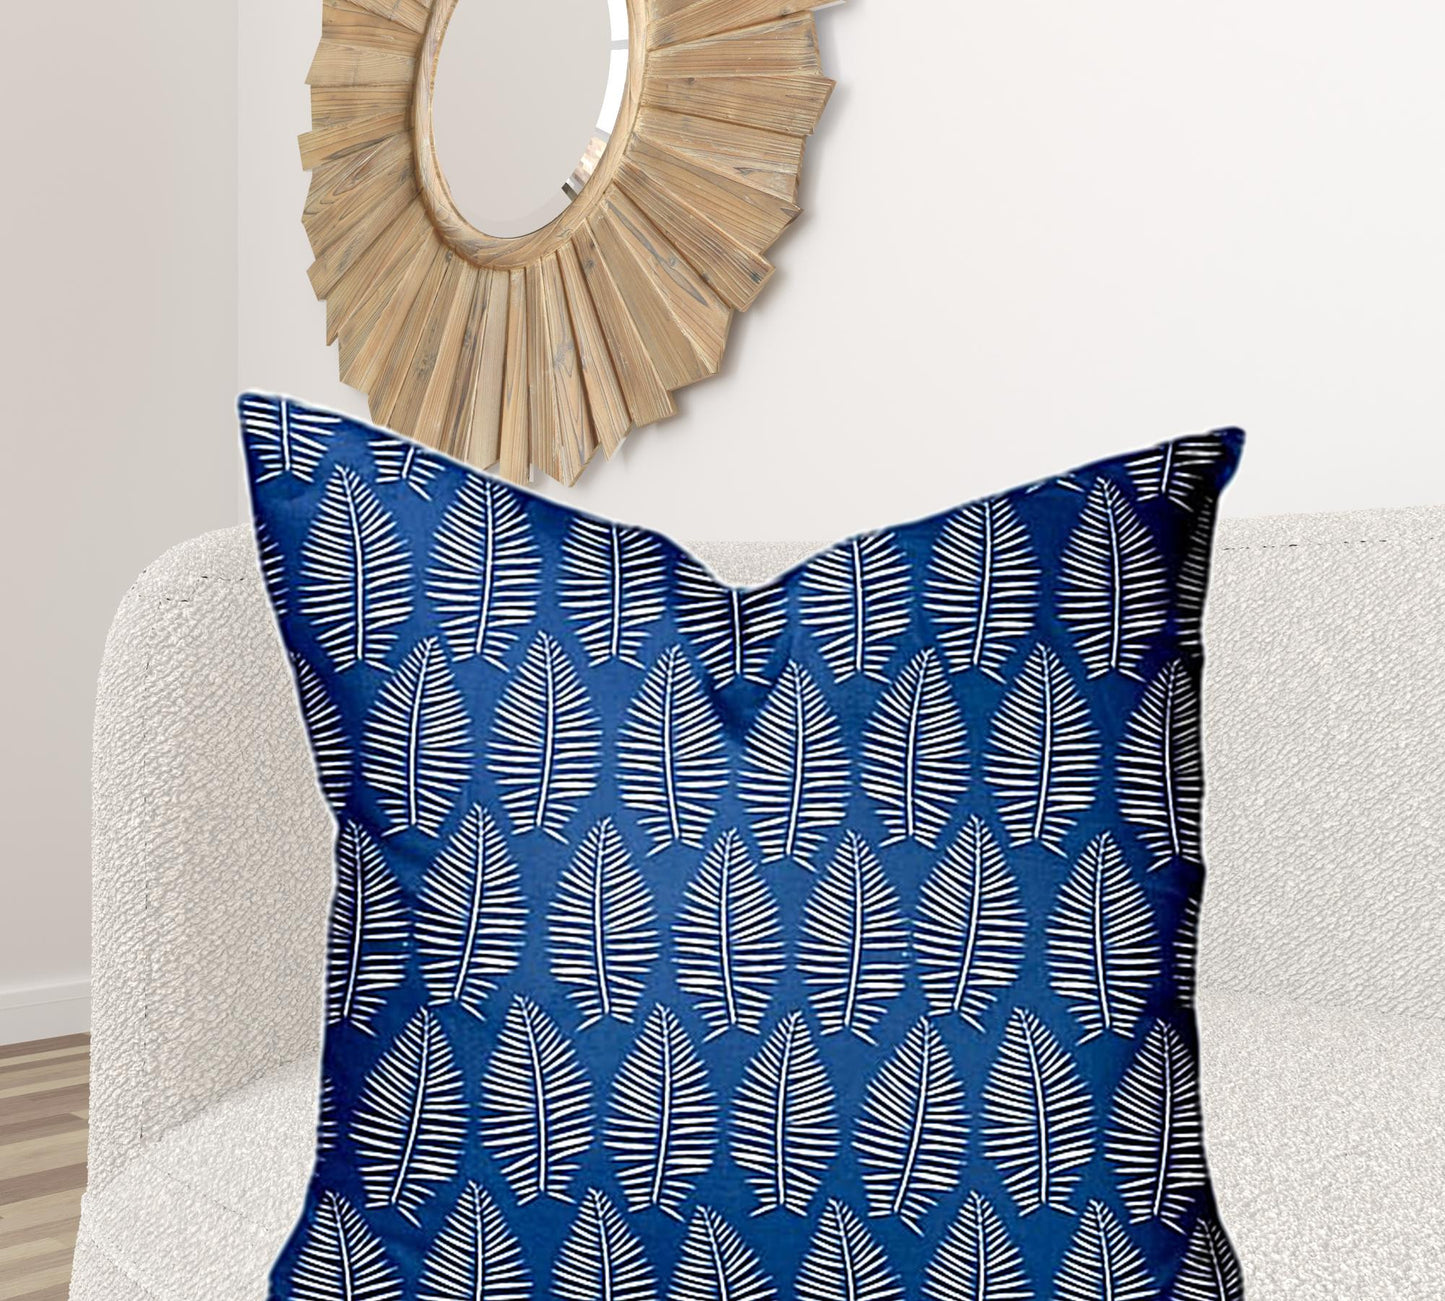 36" X 36" Blue And White Zippered Tropical Throw Indoor Outdoor Pillow Cover